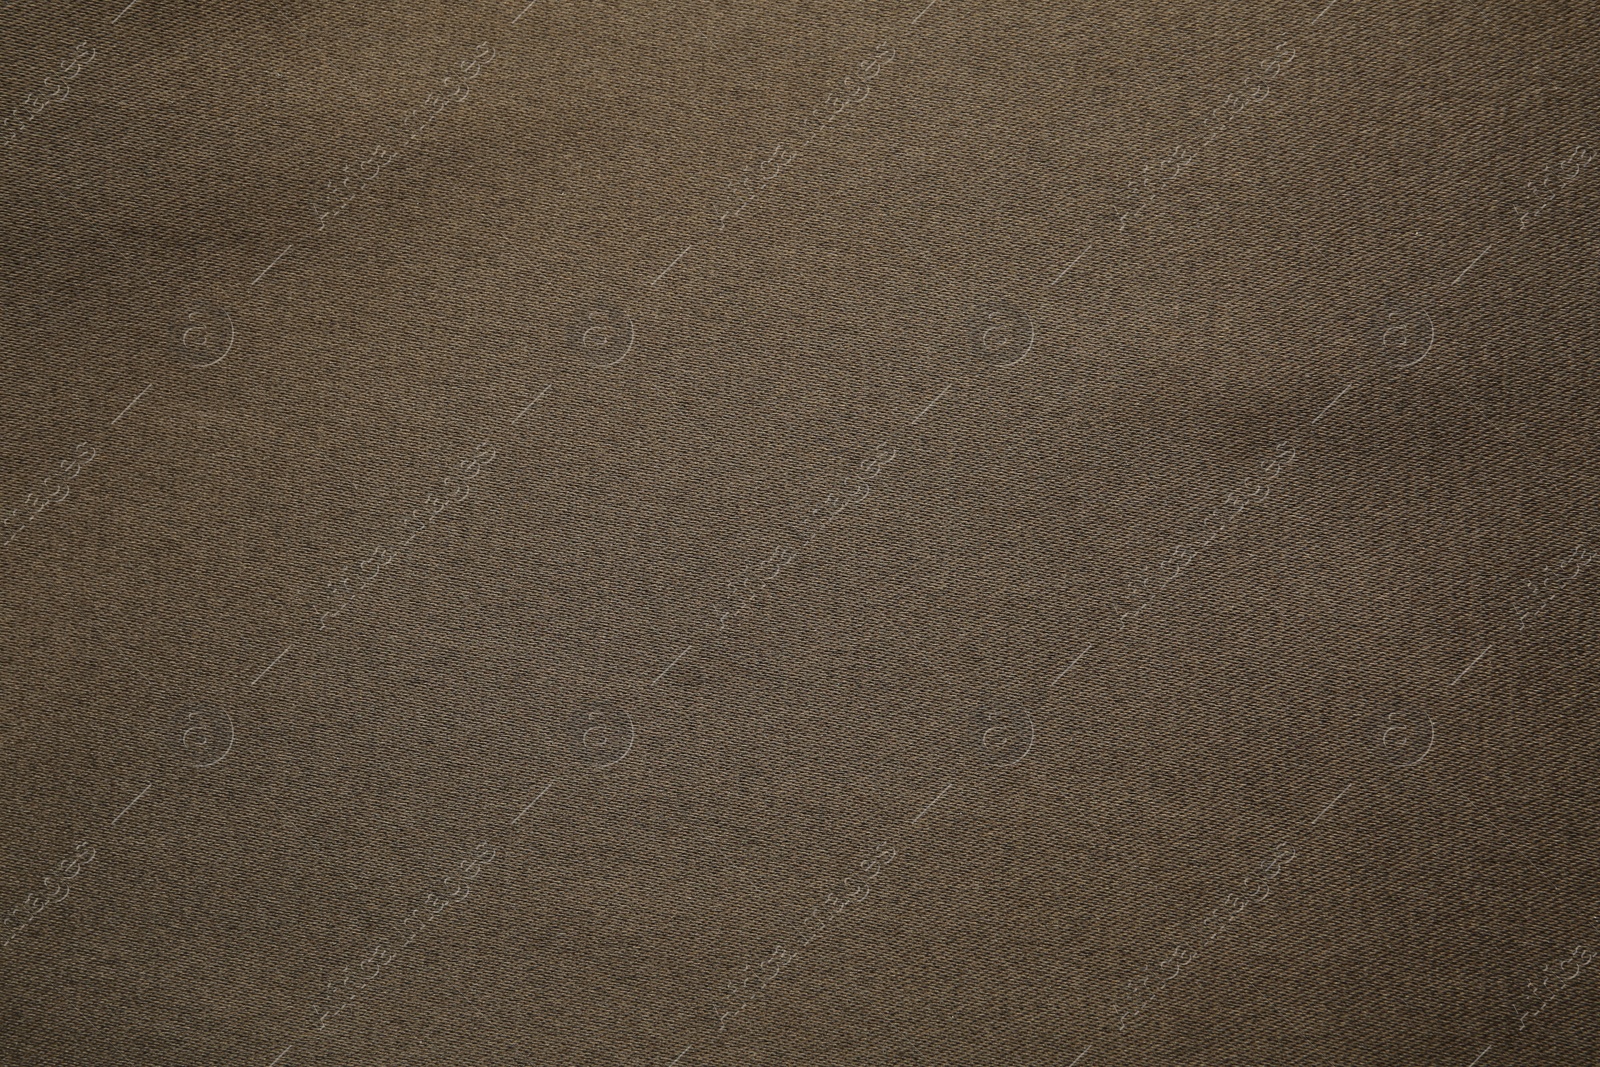 Photo of Texture of beautiful brown fabric as background, closeup